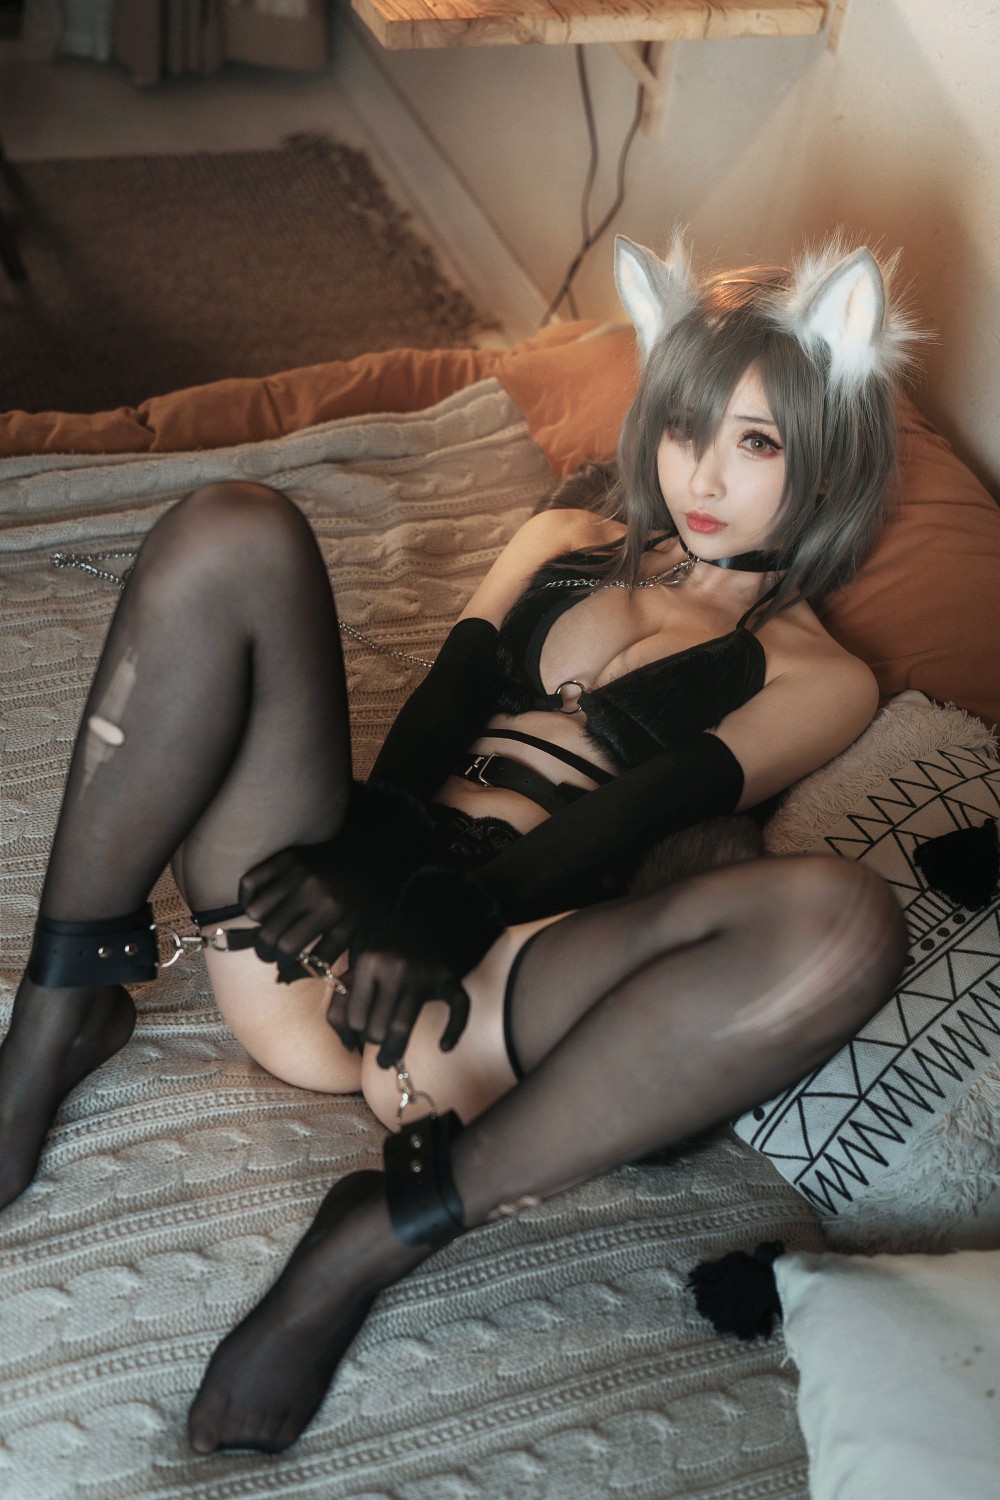 [Cosplay]rioko凉凉子 - Wounded Wolf Sister1 